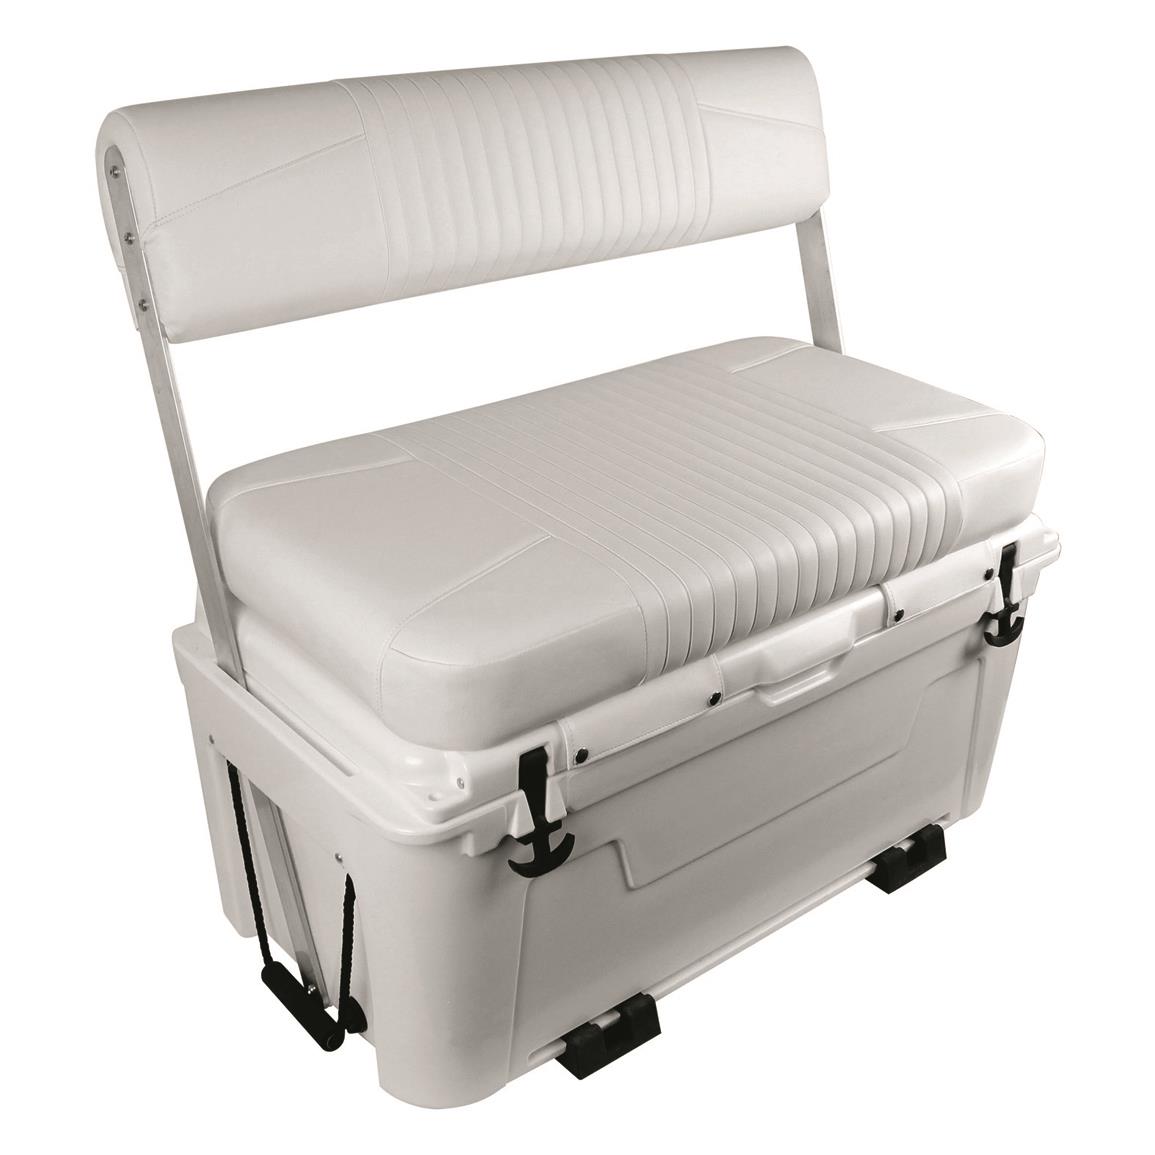 Wise Ice Cage 105 Qt. Cooler with Swingback Seat